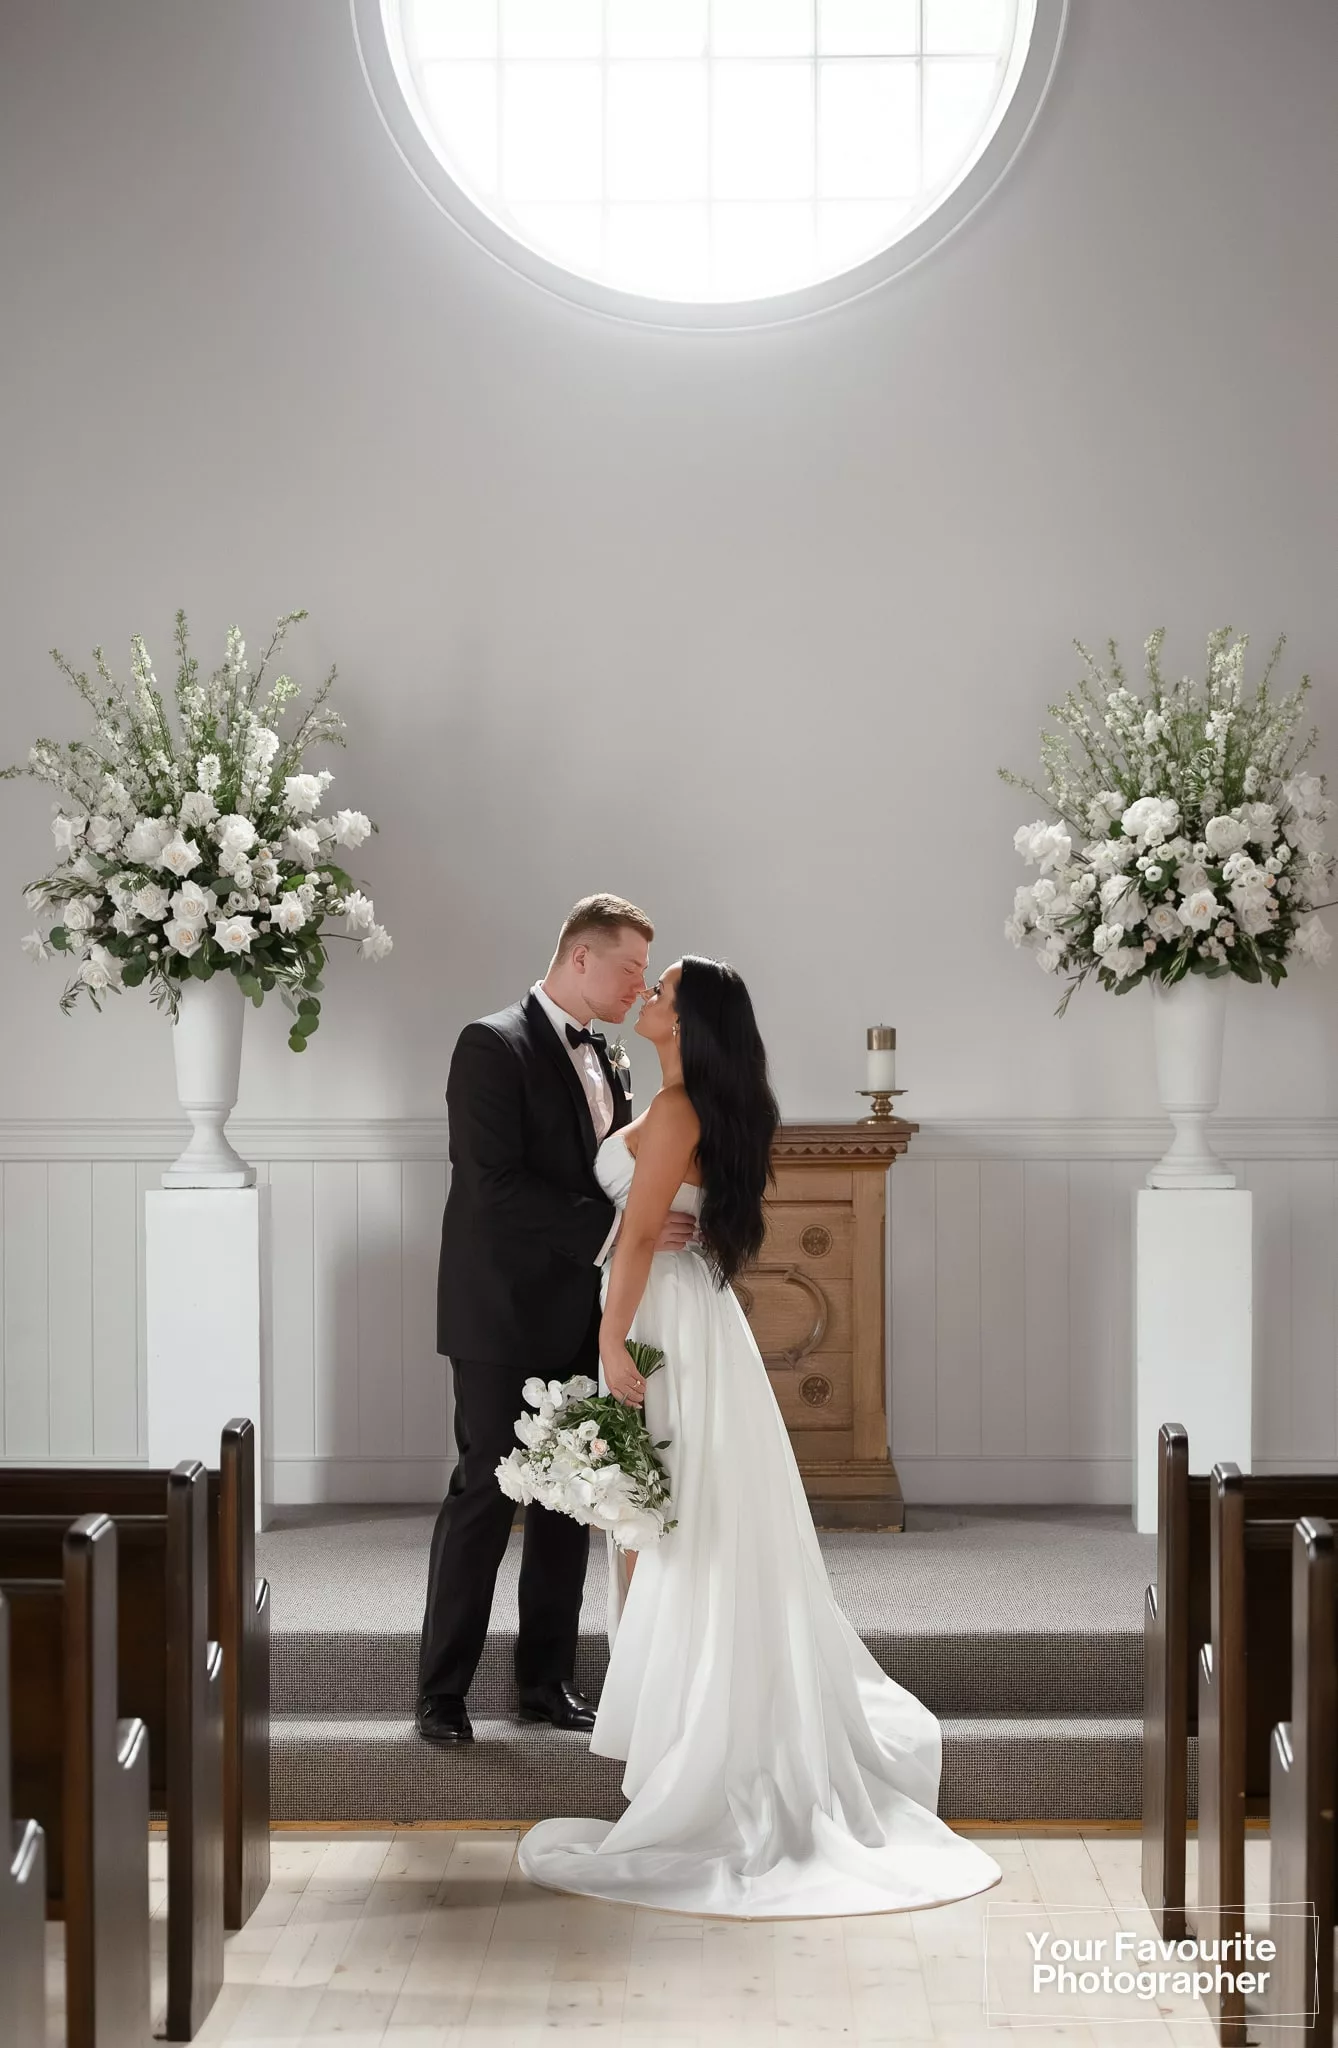 Bride and groom share a moment alone at the alter of the chapel at The Doctor's House in Kleinburg